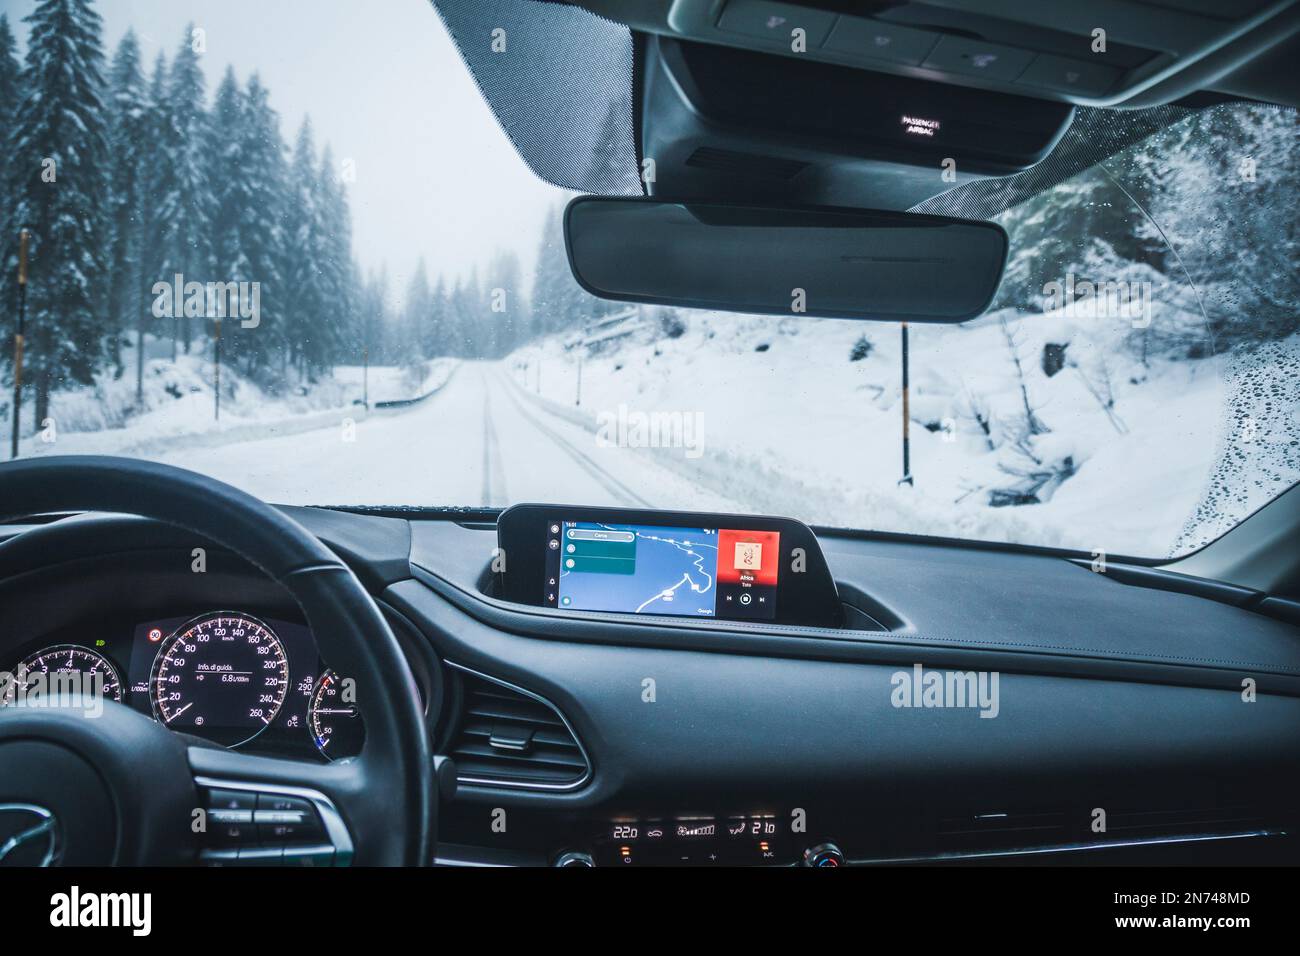 Italy, Veneto, Belluno, a Mazda Motor Corp. CX-30 crossover sport utility vehicle (SUV), inside view, car cockpit, driving on snowy mountain road Stock Photo